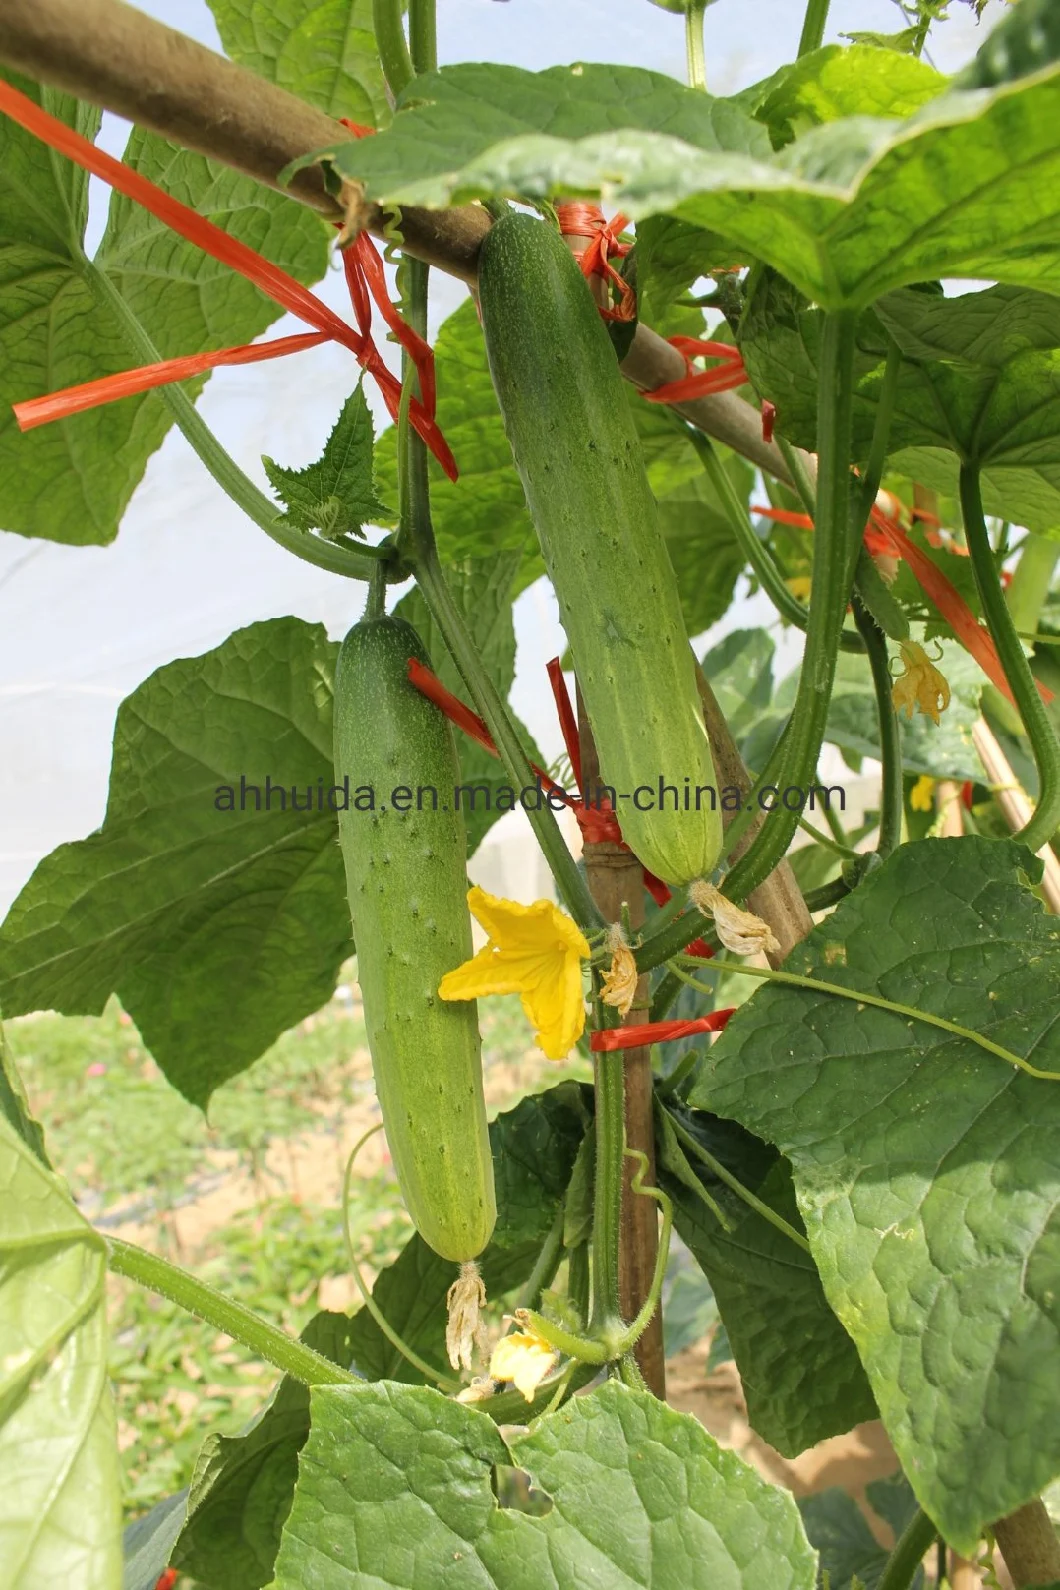 HD White Skin Cucumber Seeds for Sowing